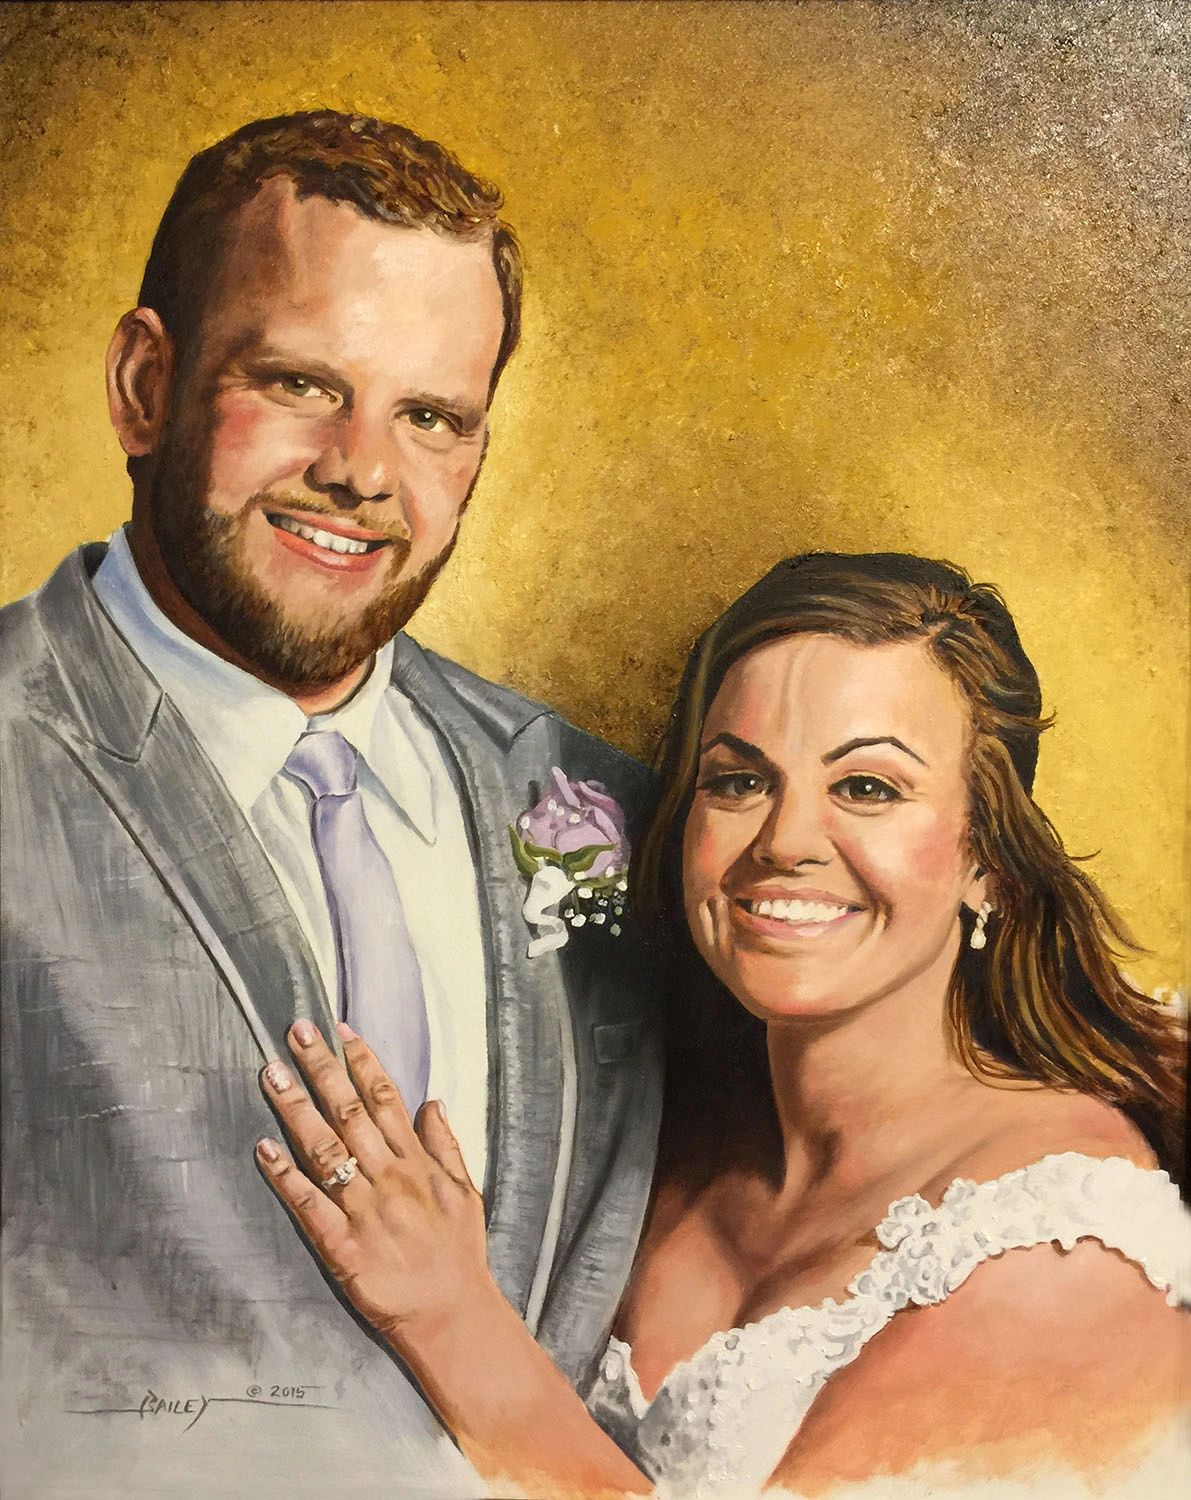 Colored oil wedding portrait of man and woman smiling. She has her hand on his chest.